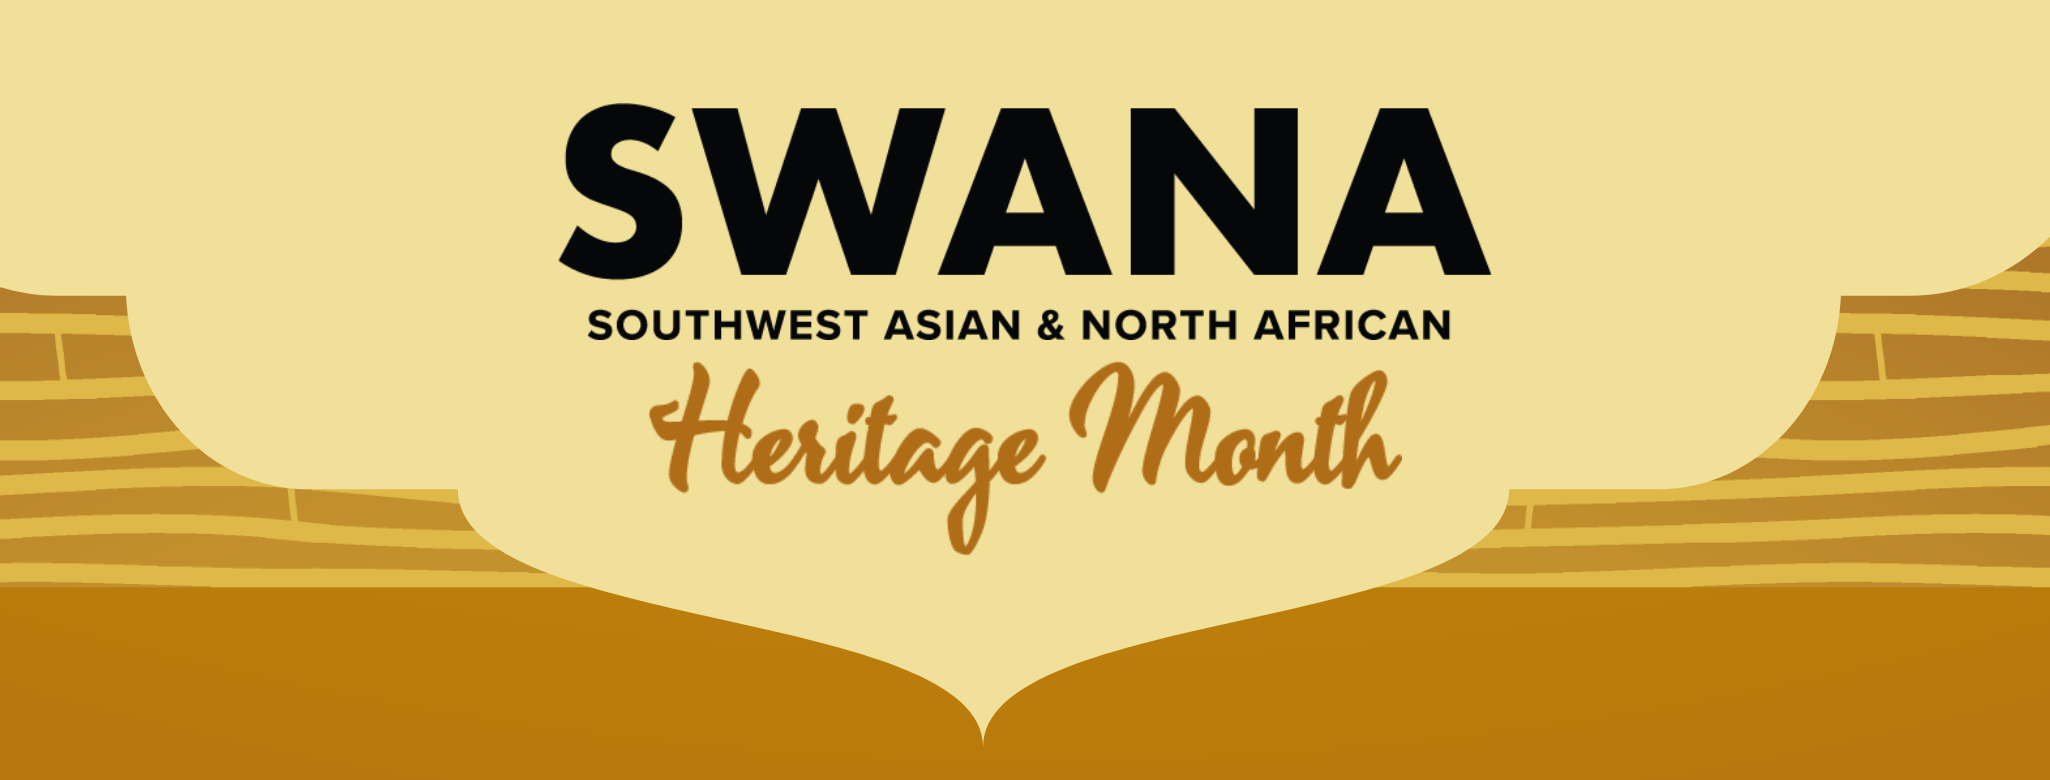 Yellow graphic with black and gold text saying "SWANA. Southwest Asian and North African Heritage Month". For more information, please visit https://sacd.sdsu.edu/intercultural-relations/swana.